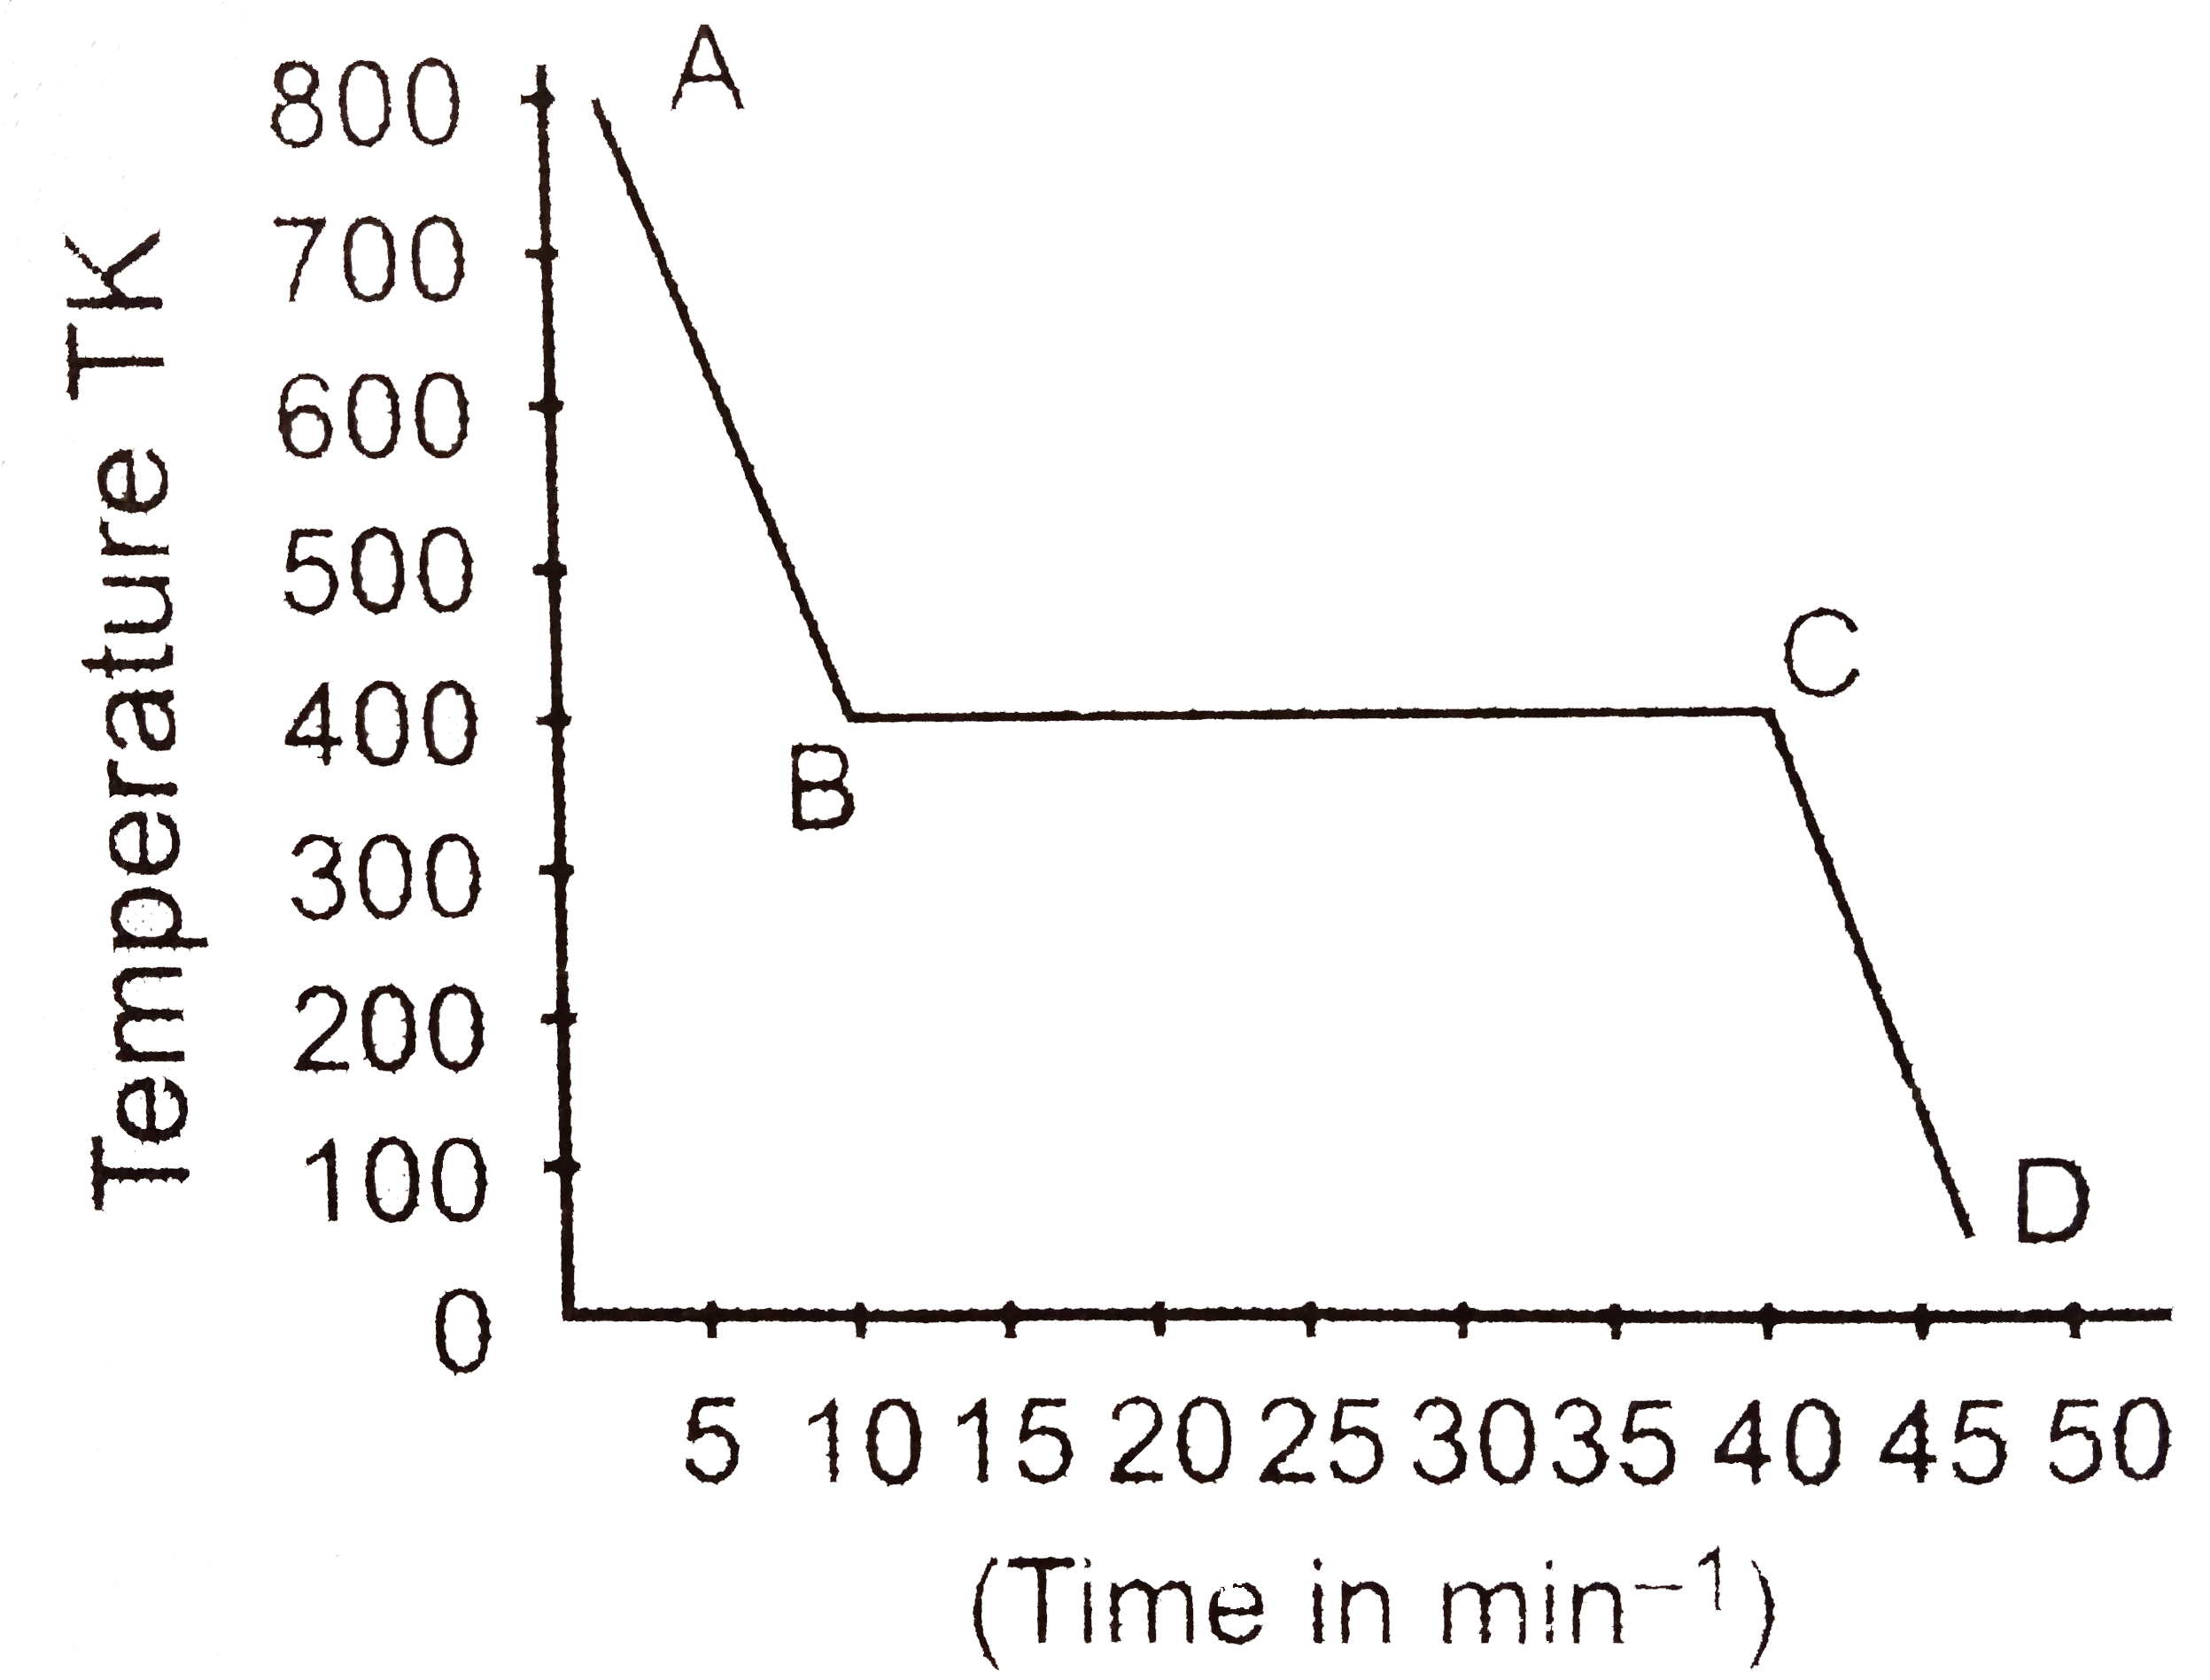 One mole of a substance is cooled at the rate of 0.4 kJ min^(-1) as shown in the graph. Curve AB, points B and C and curve CD represent respectively, the cooling of the liquid, start of freezing, completion of freezing and cooling of the solid based on this data. The entropy of fusion in J molK^(-1) is :